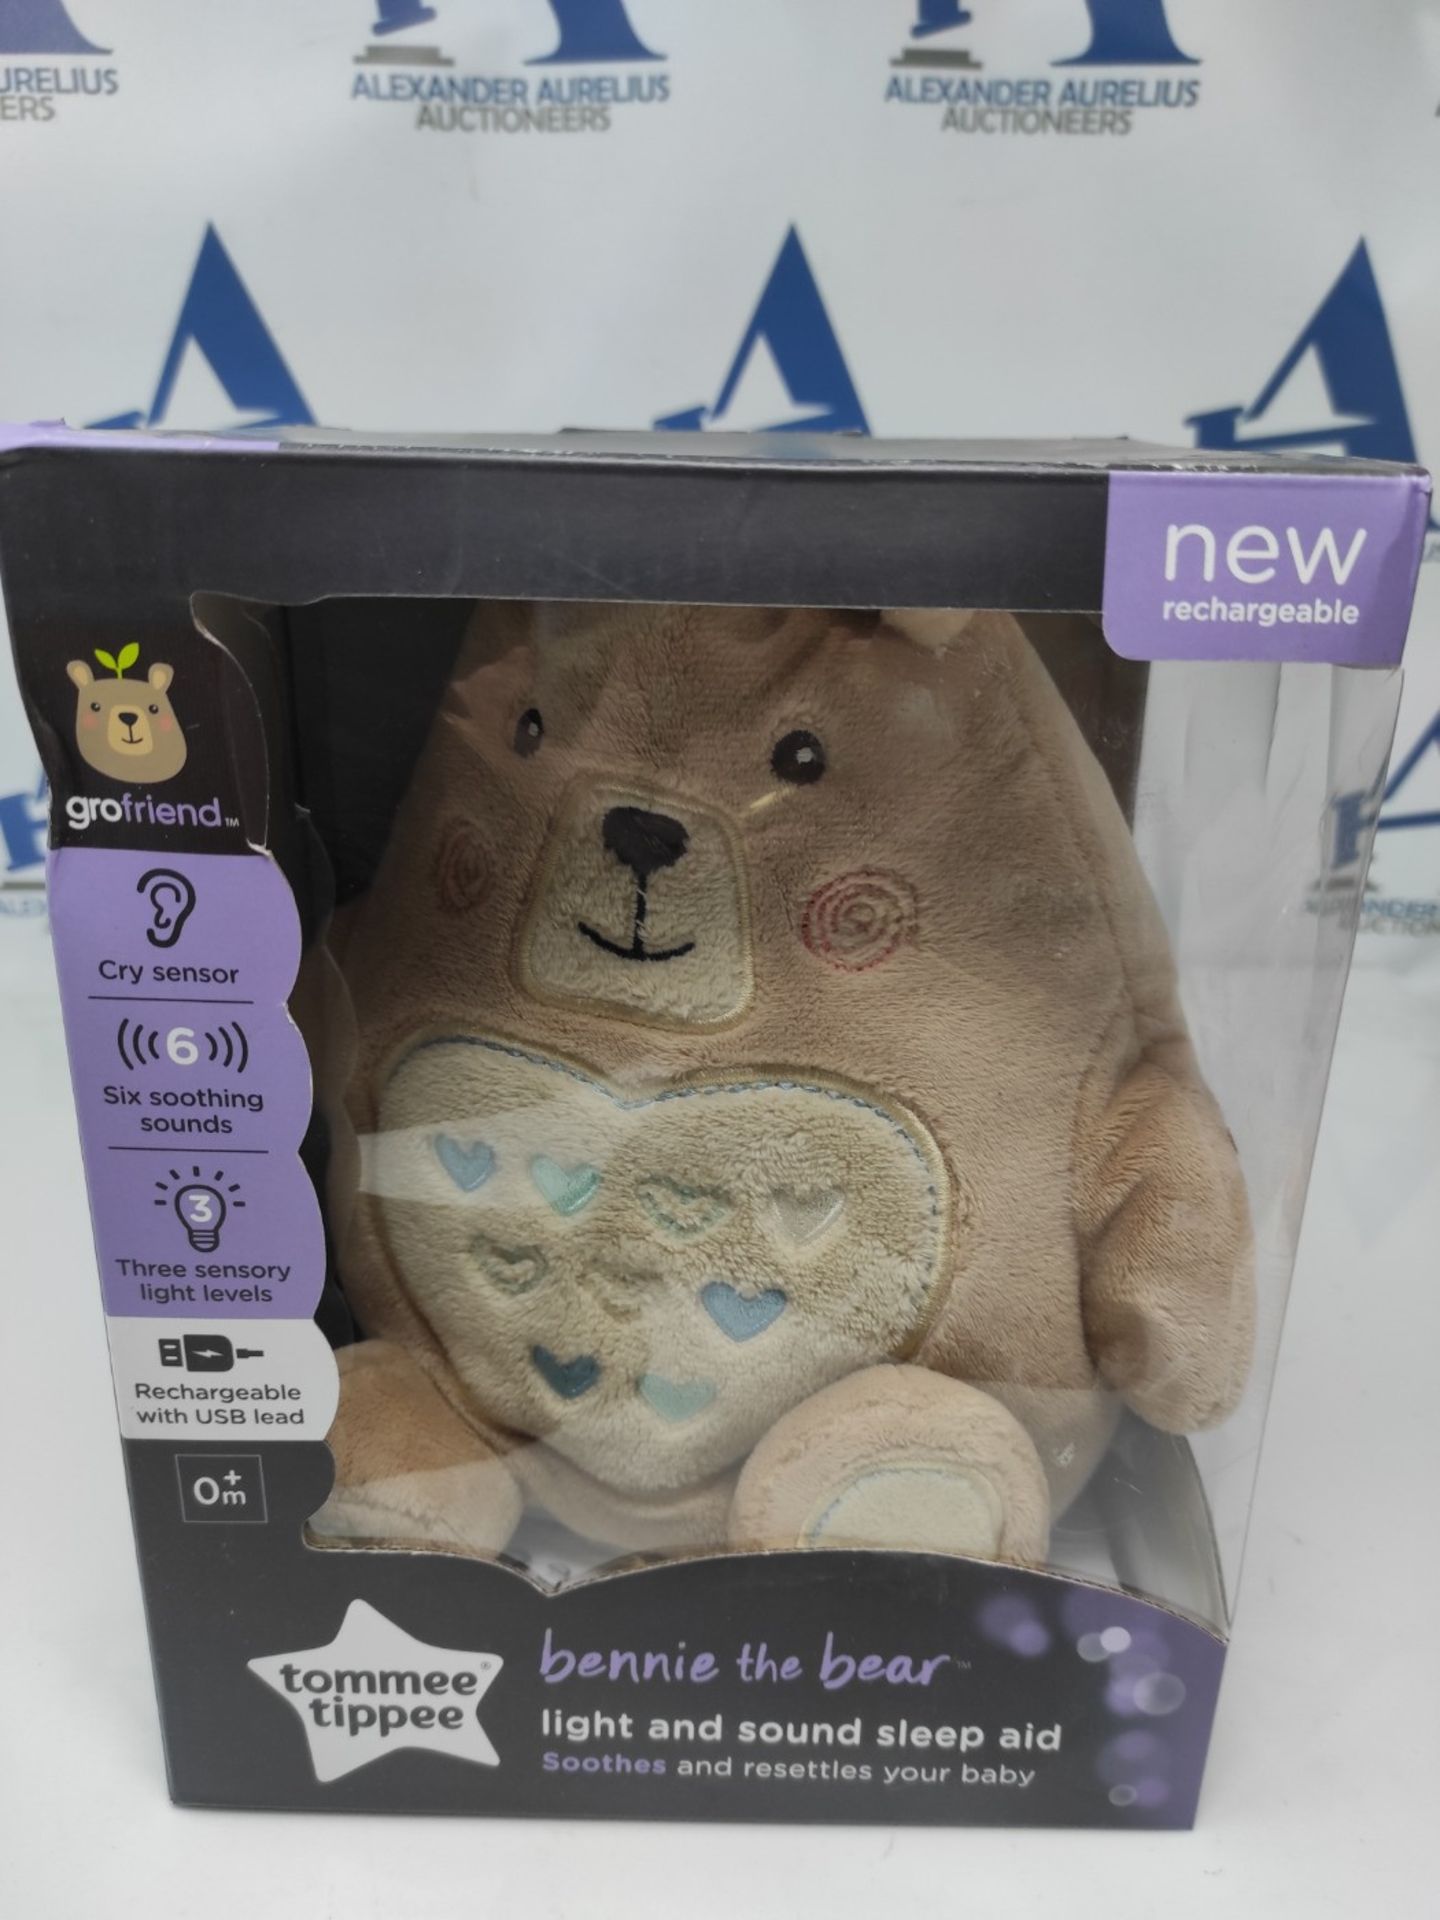 Tommee Tippee Bennie The Bear Grofriends is a rechargeable light and sound sleep aid. - Image 2 of 2